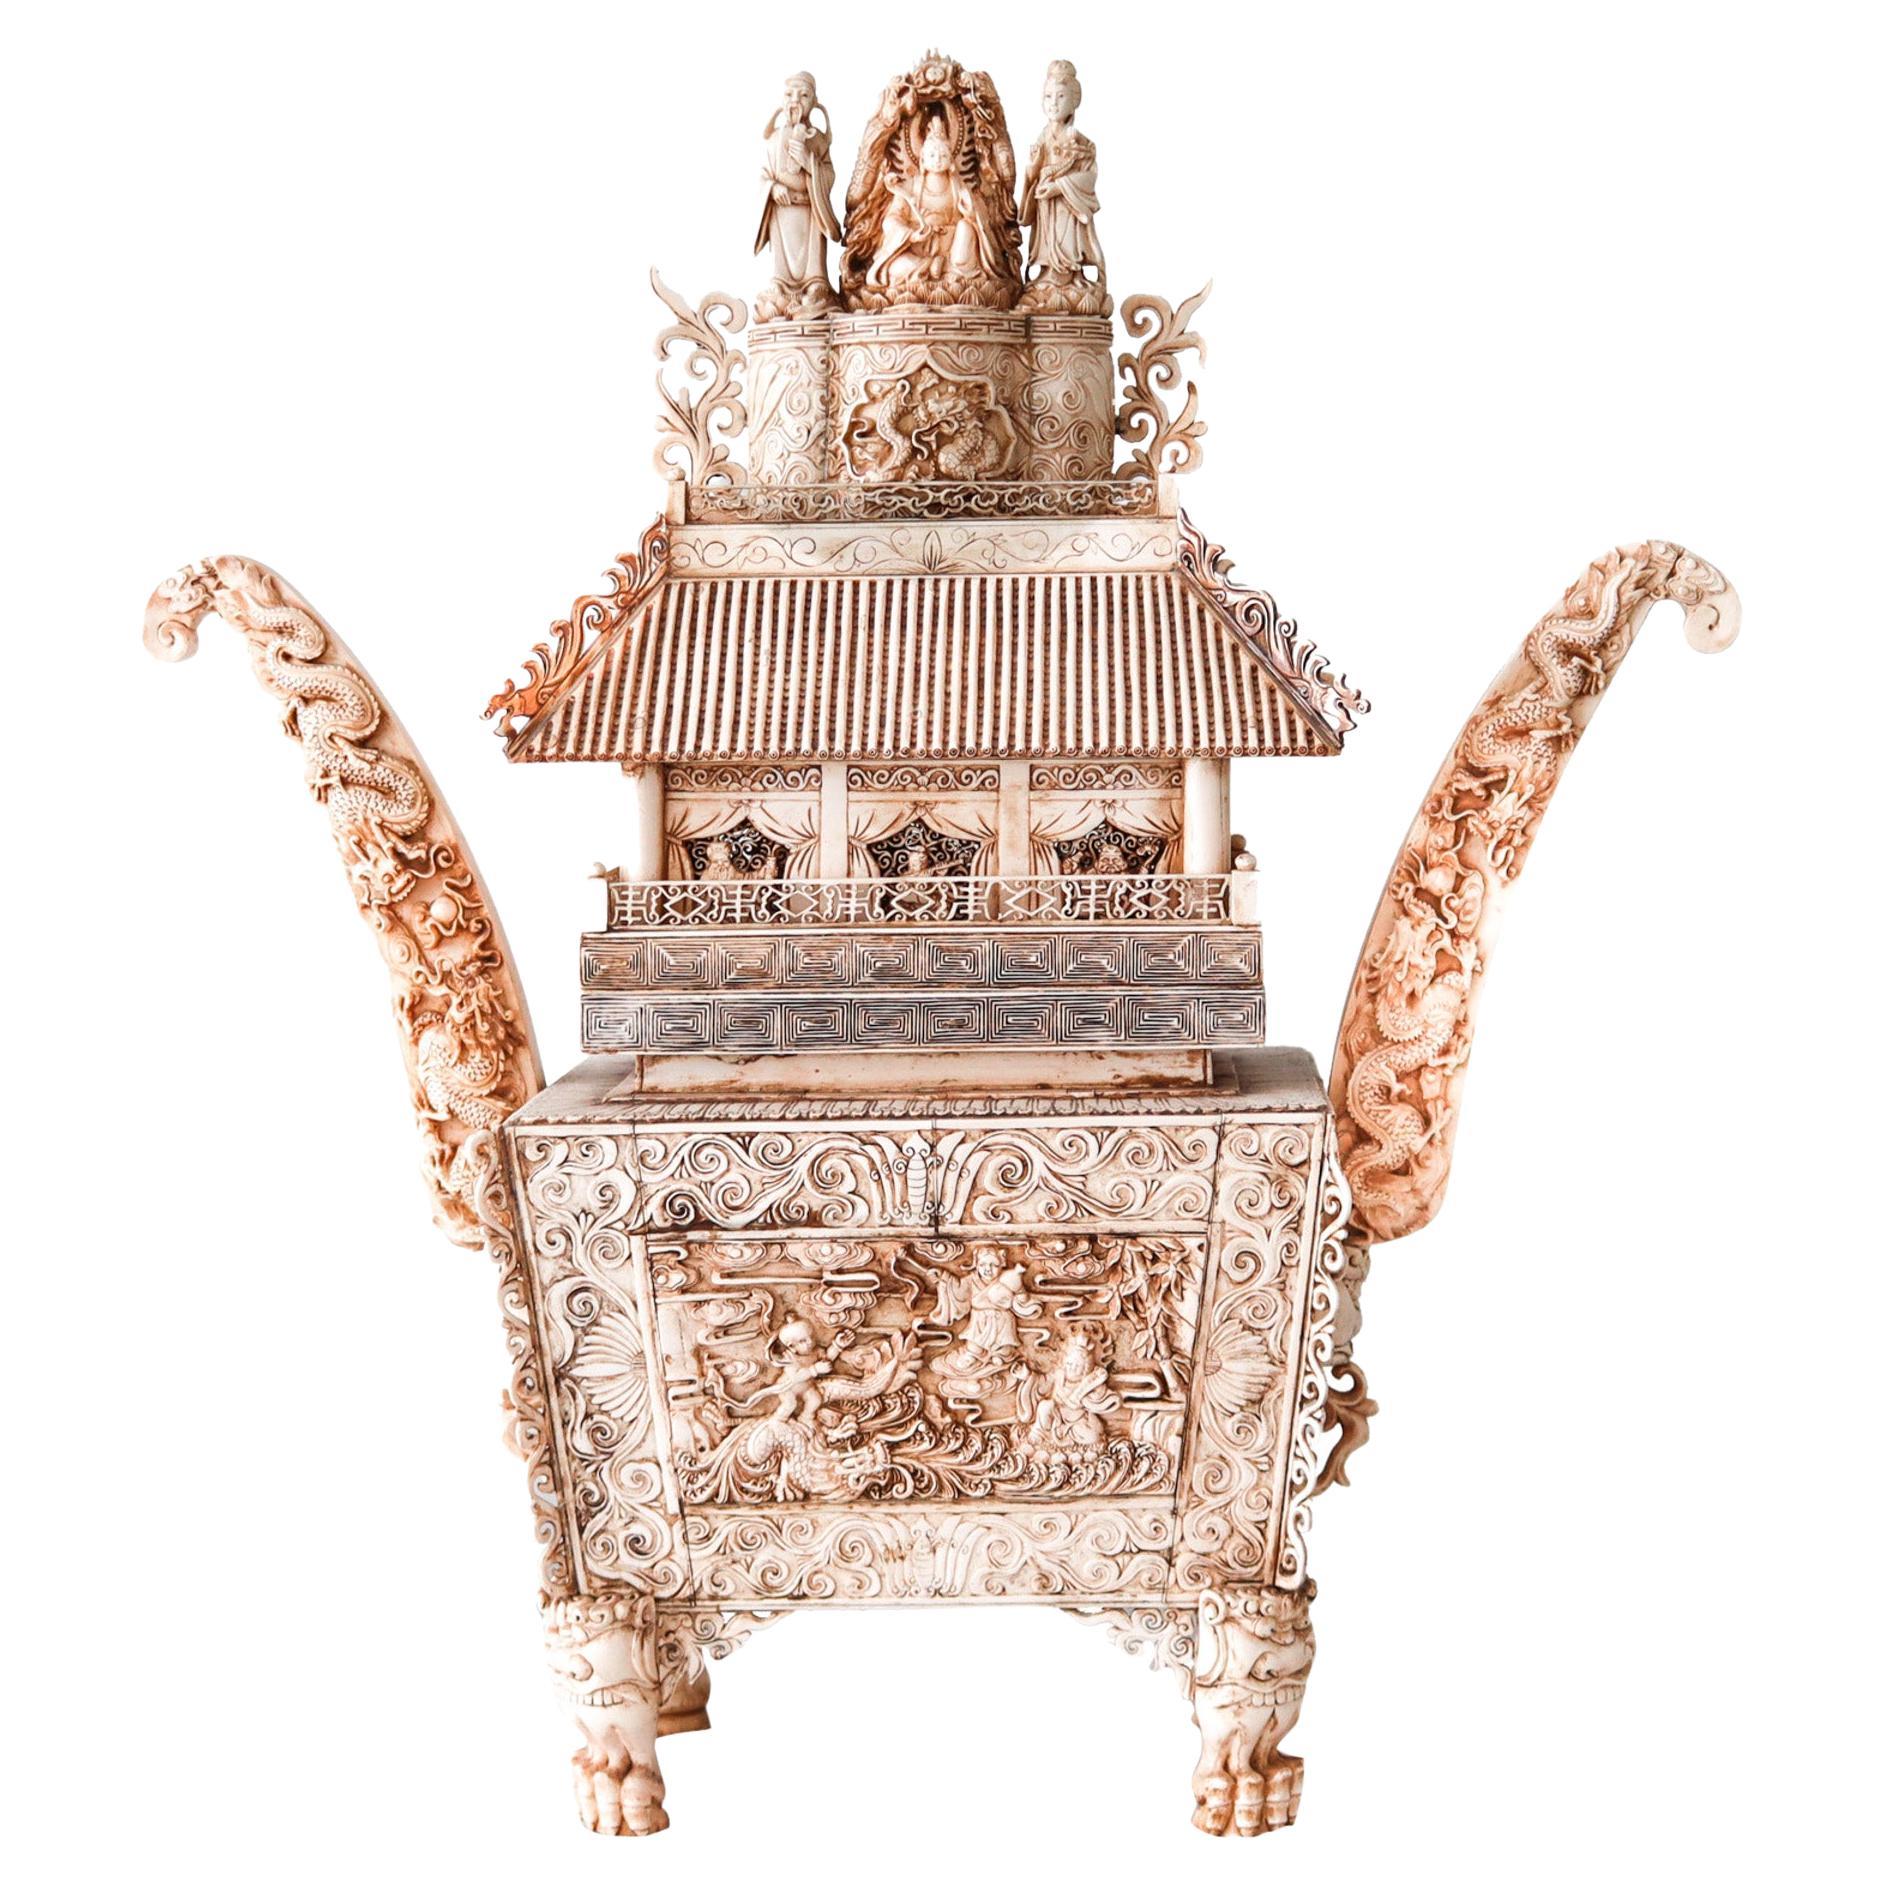 Chinese 1900 Qing Dynasty Bodhisattva Altar Temple-Pagoda In Wood And Carvings For Sale